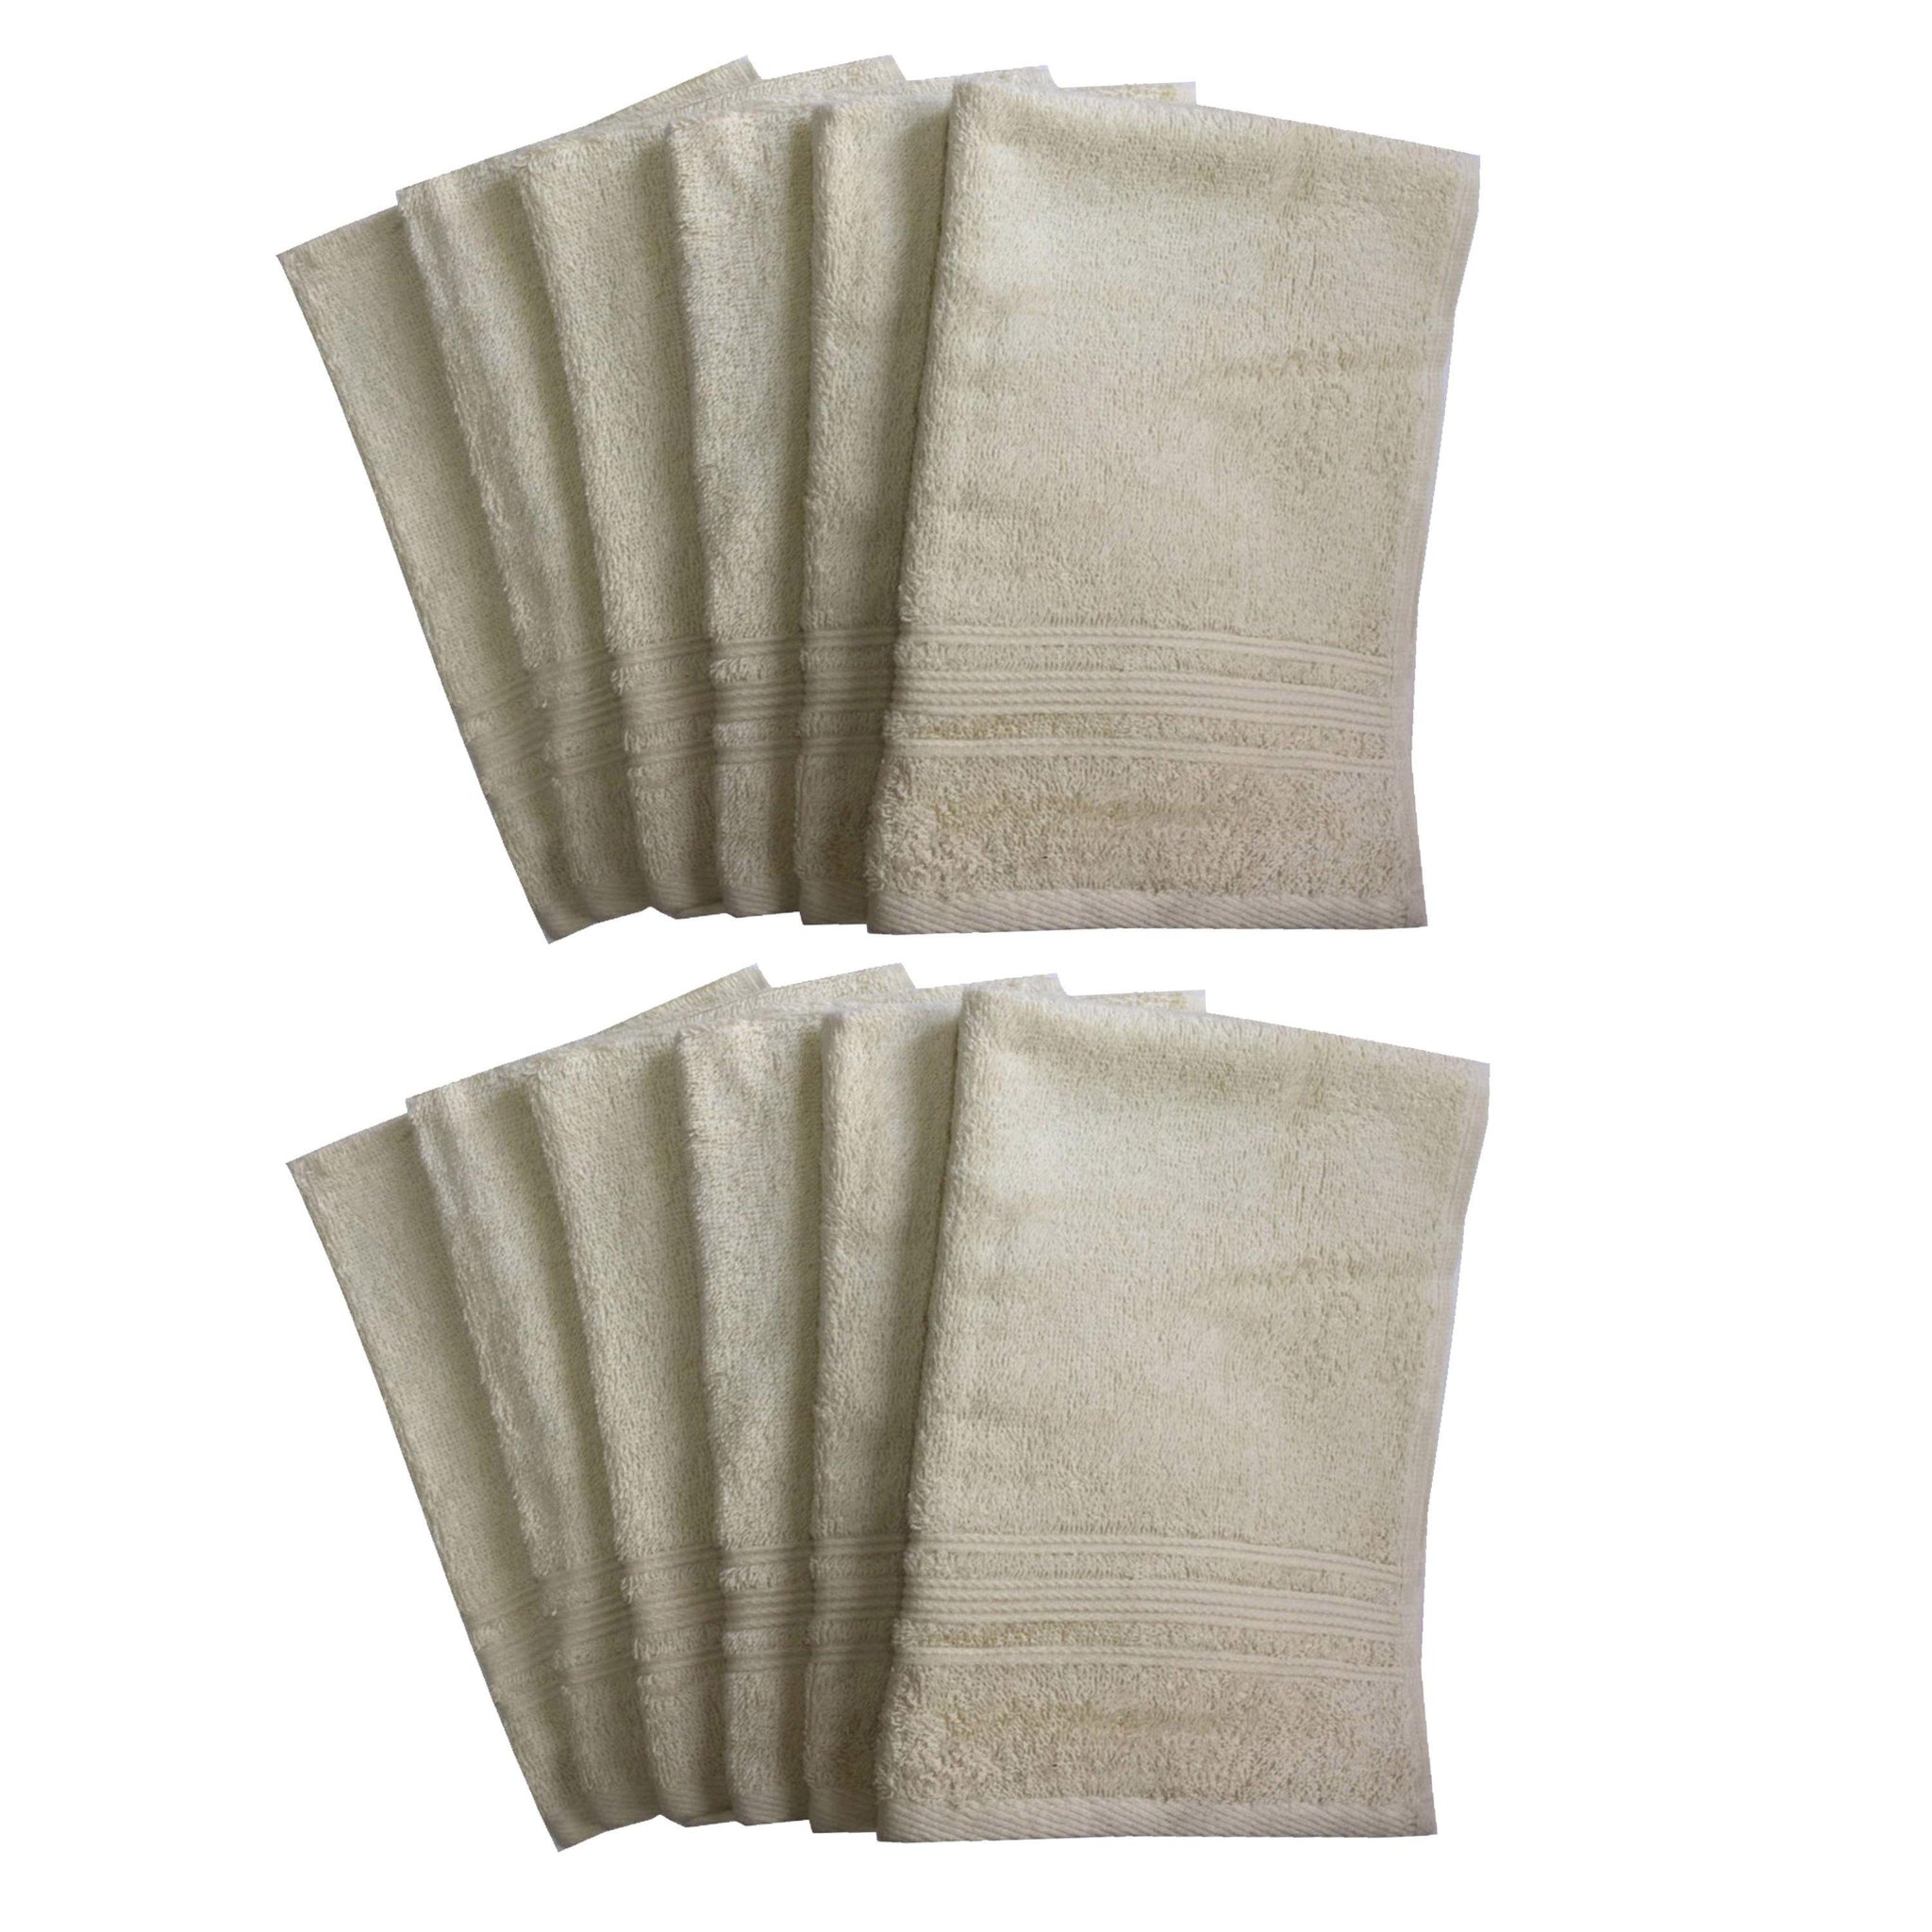 Lushomes Cream Super Soft and Fluffy Cotton Hand Towel Set (Size: 40 x 60 cms, Pack of 12, 450 GSM) - Lushomes